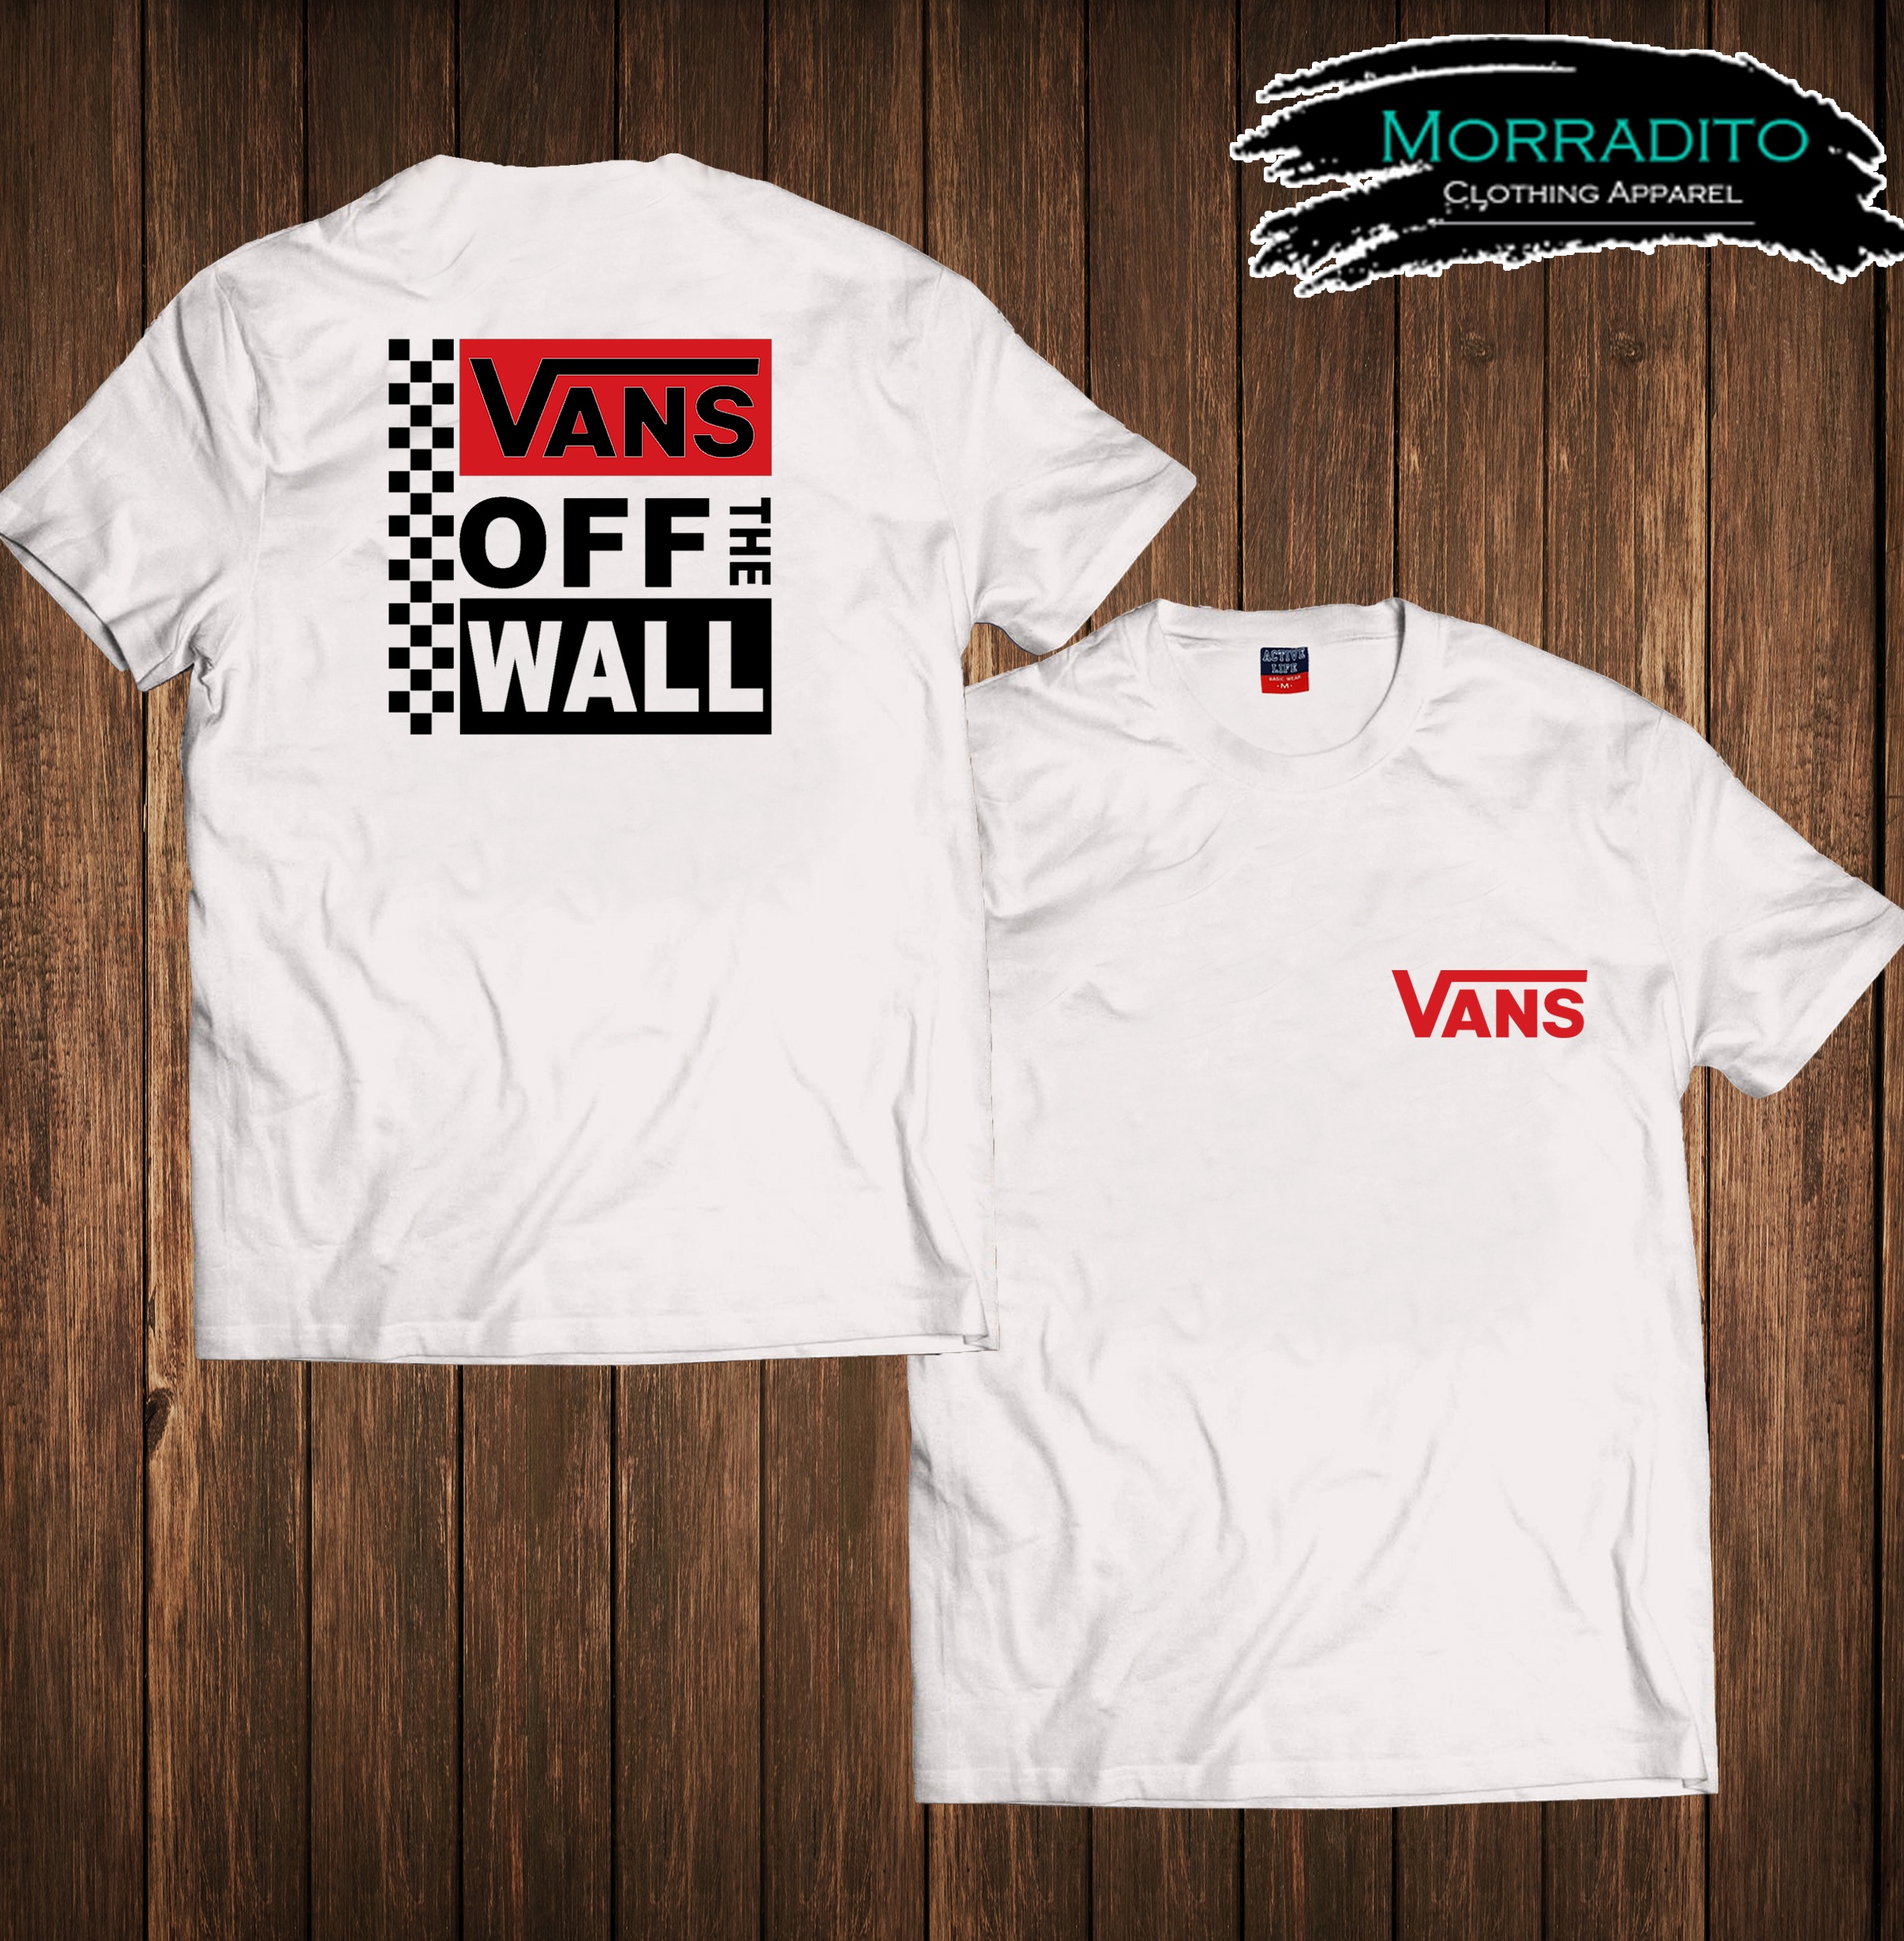 Extreme armoede Acquiesce rundvlees VANS OFF THE WALL SHIRT 2020 | Lazada PH